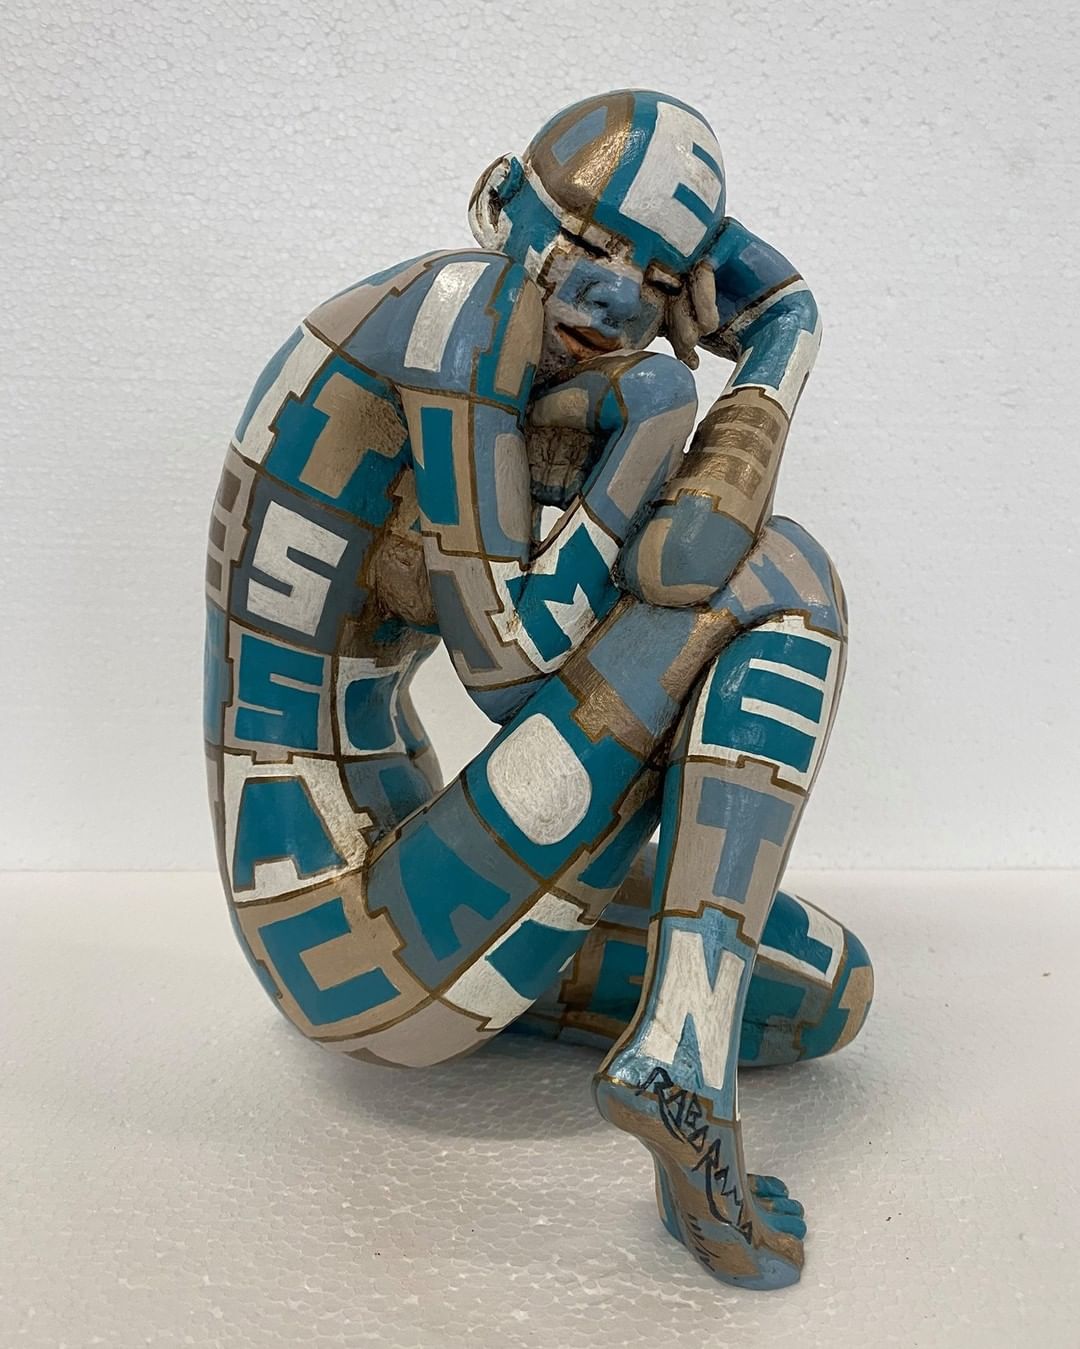 Expressive Figurative Sculptures Gorgeously Covered By Colorful Patterns By Paola Epifani Rabarama 18